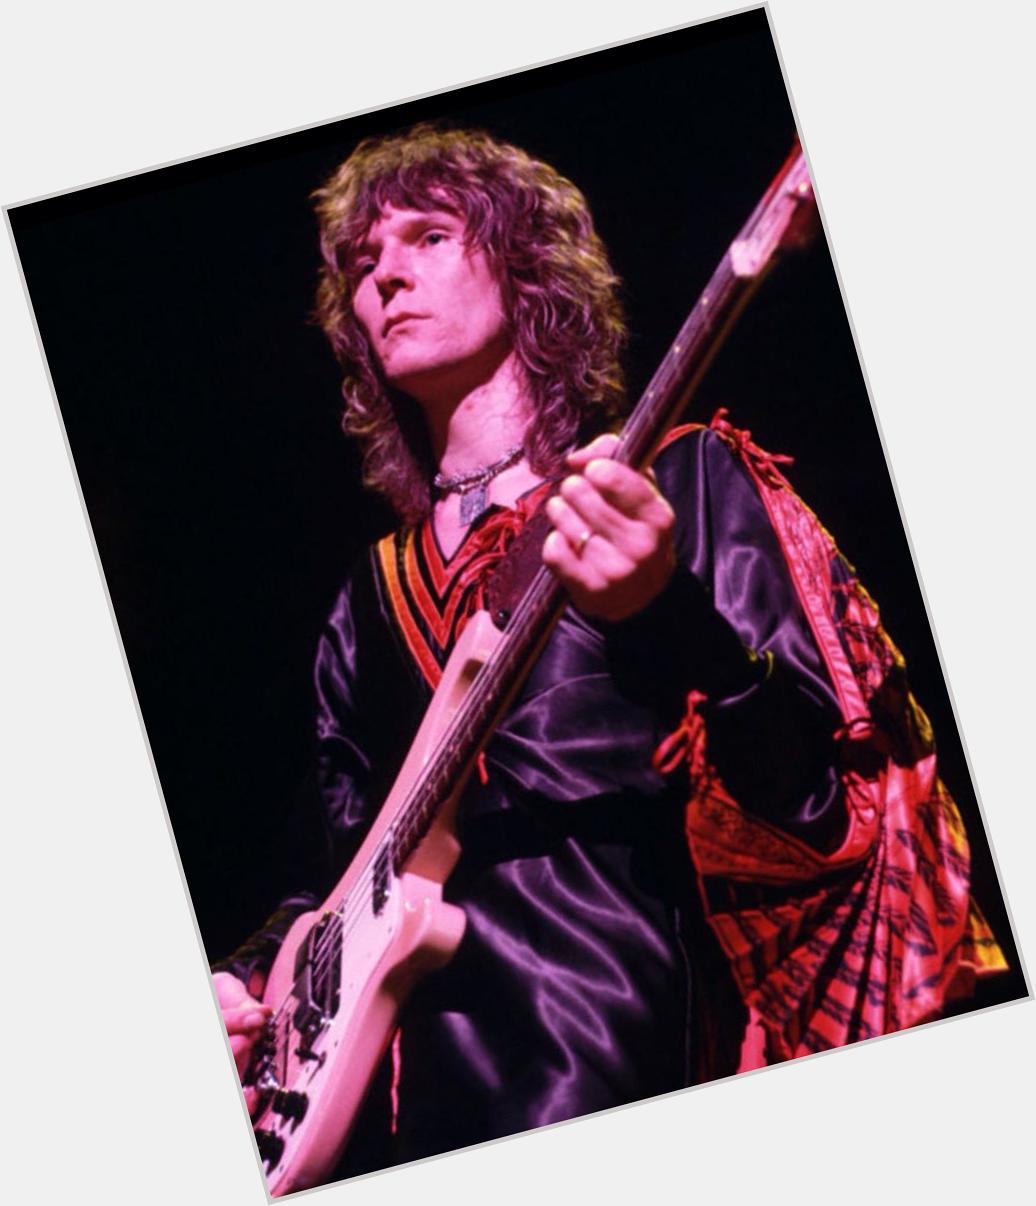 04/03/1948 Happy Birthday, Chris Squire, bassist of Yes 